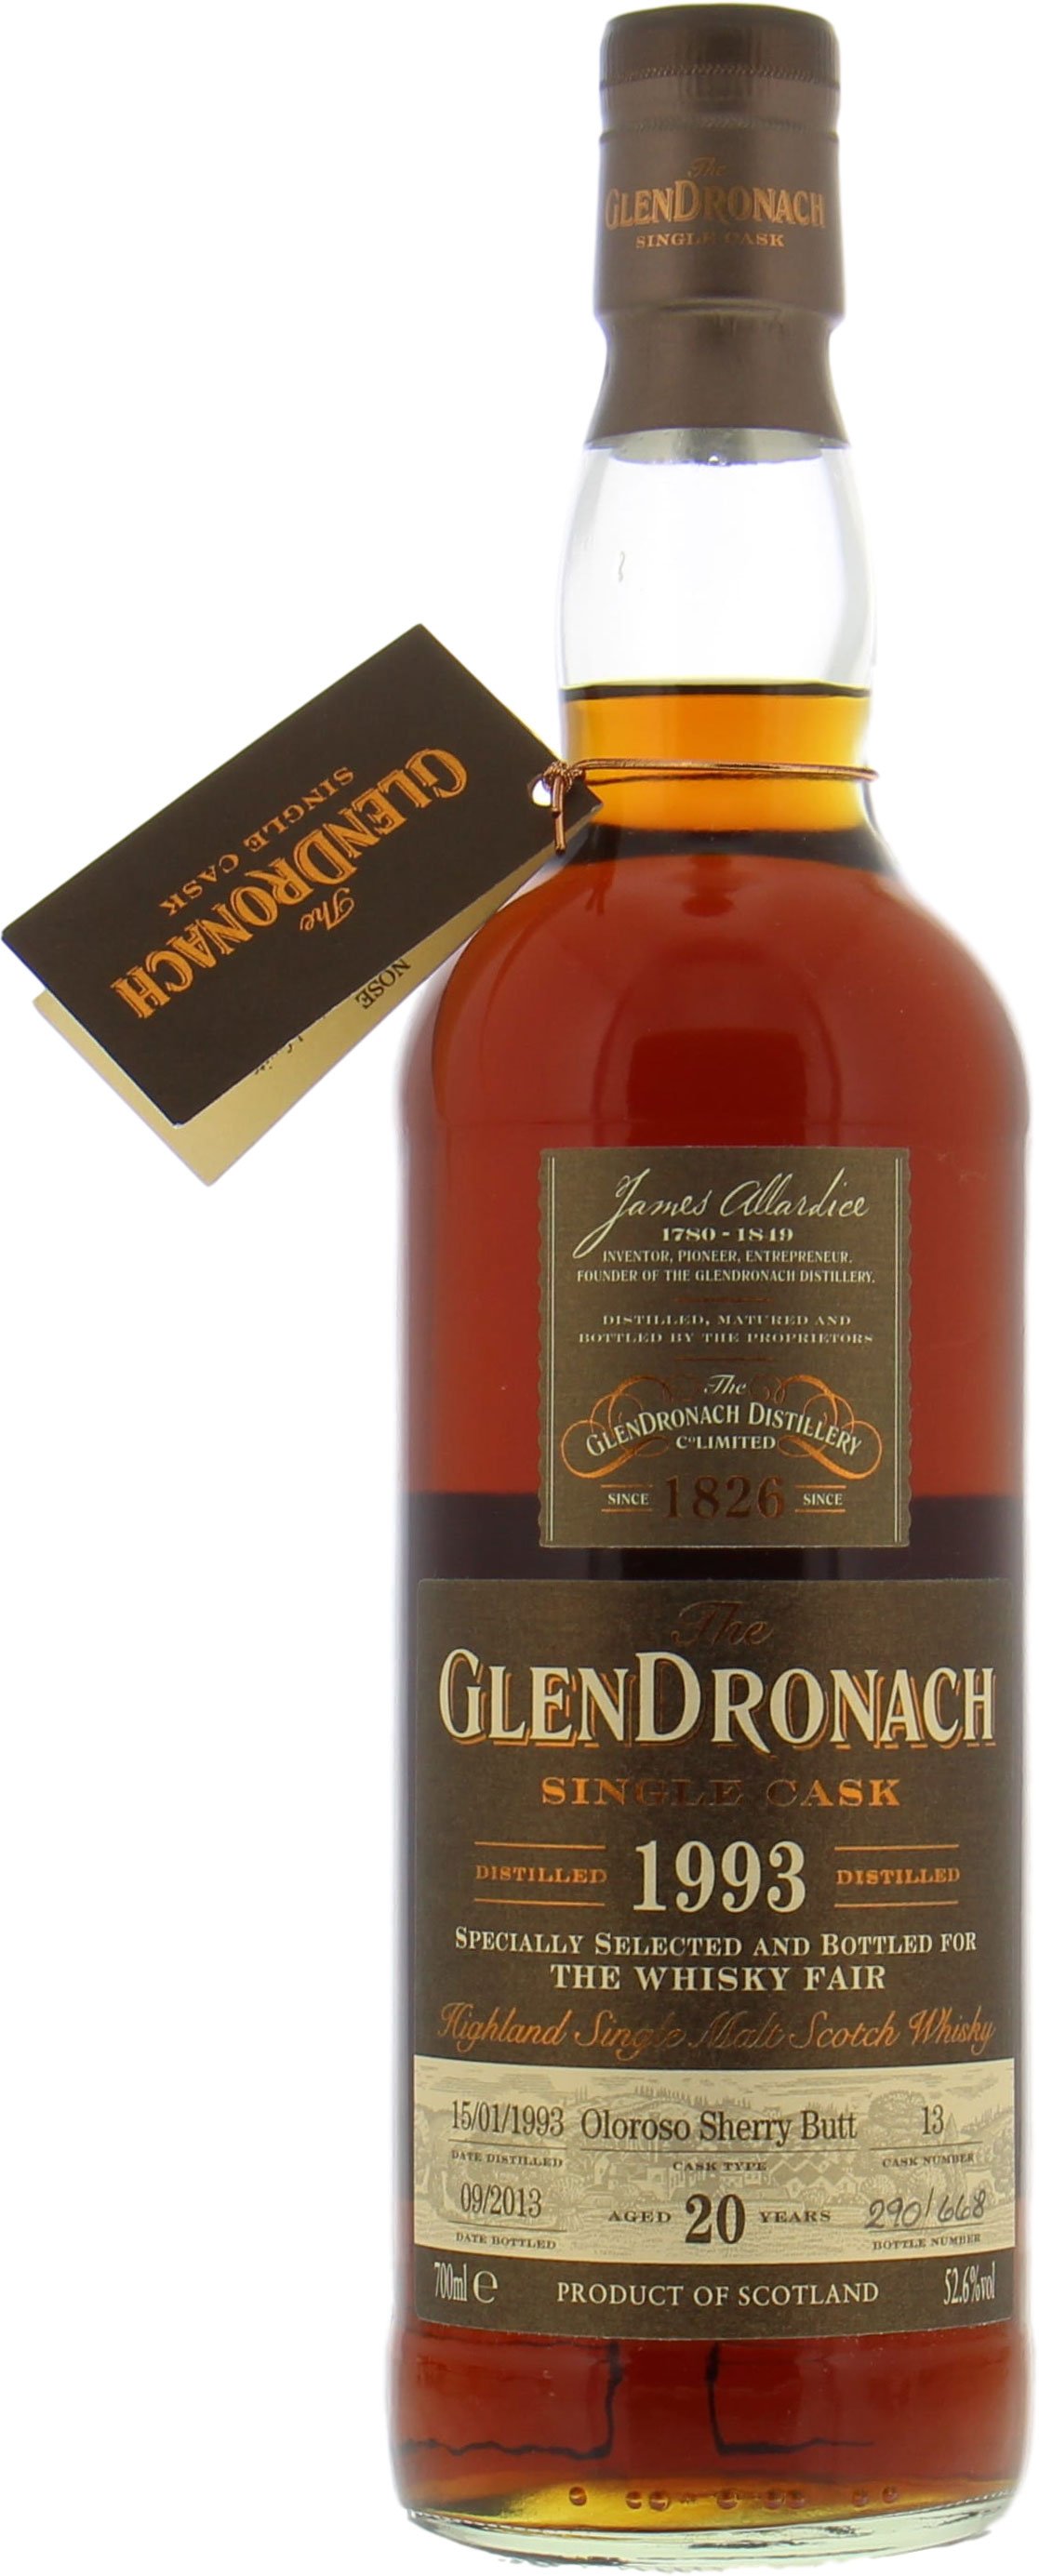 Glendronach - 20 Years Old Cask:13 For The Whisky Fair Germany 52.6% 1993 NO OC INCLUDED!